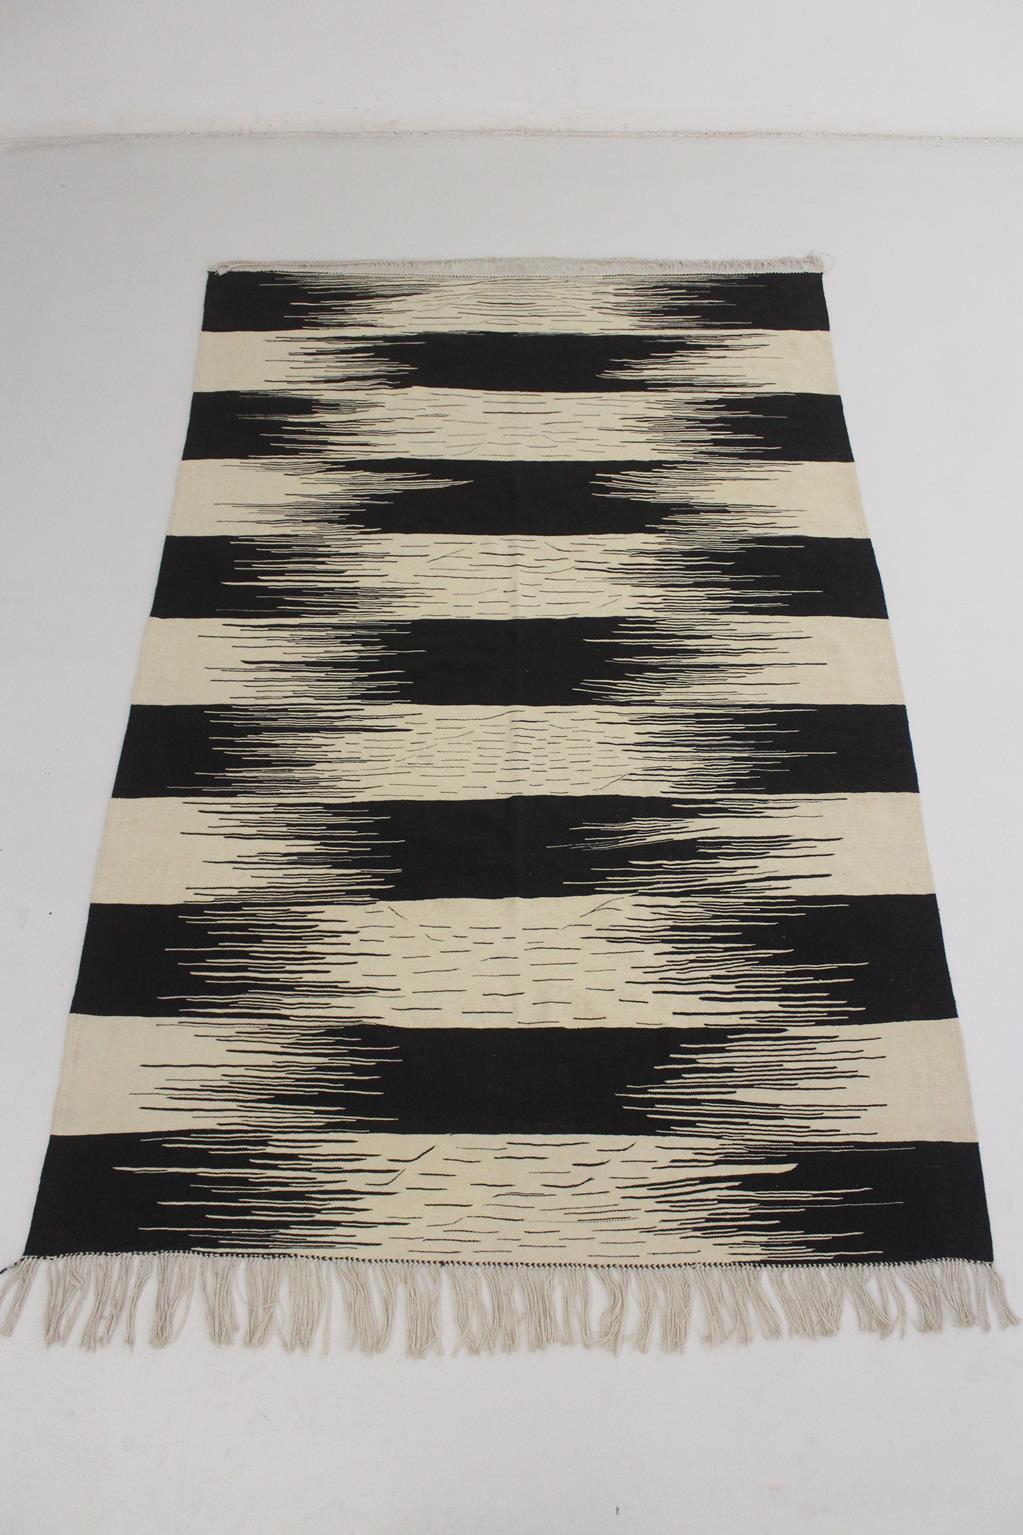 I sourced this newly-made, striped Akhnif in the area of Taznakht, Morocco.

Love the modern pattern and the multiple small lines in the beige parts, that give rhythm to the rug. Colors are beige and black.

This rug is made of wool on a cotton